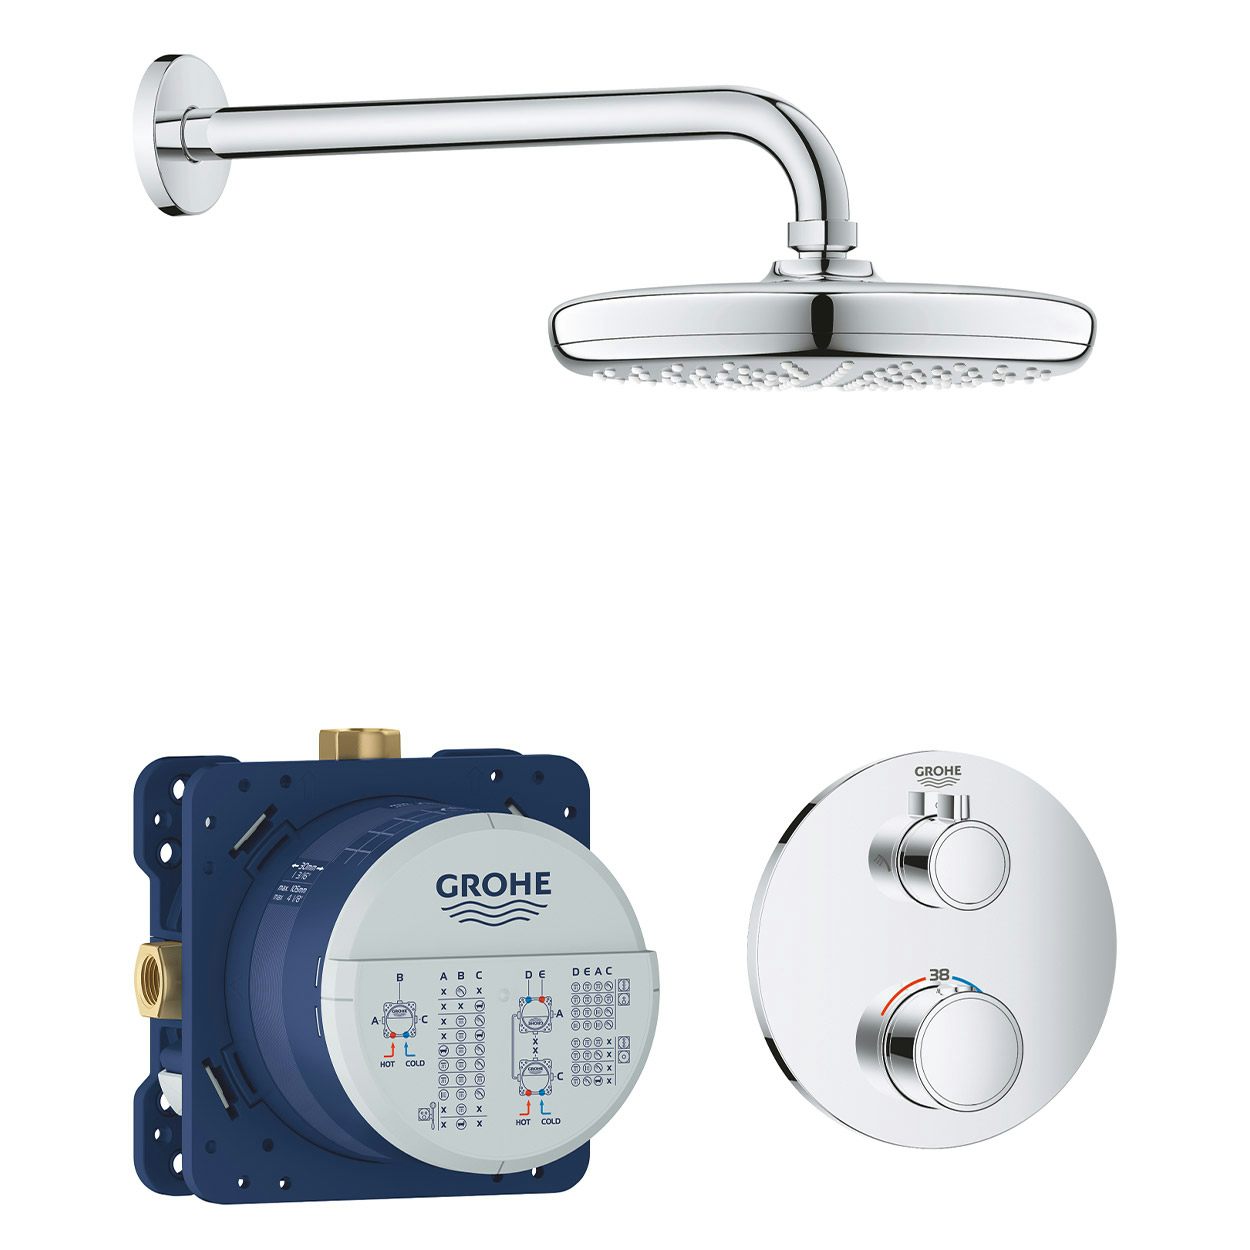 Grohe Grohtherm Perfect Shower set with Tempesta 210mm shower head